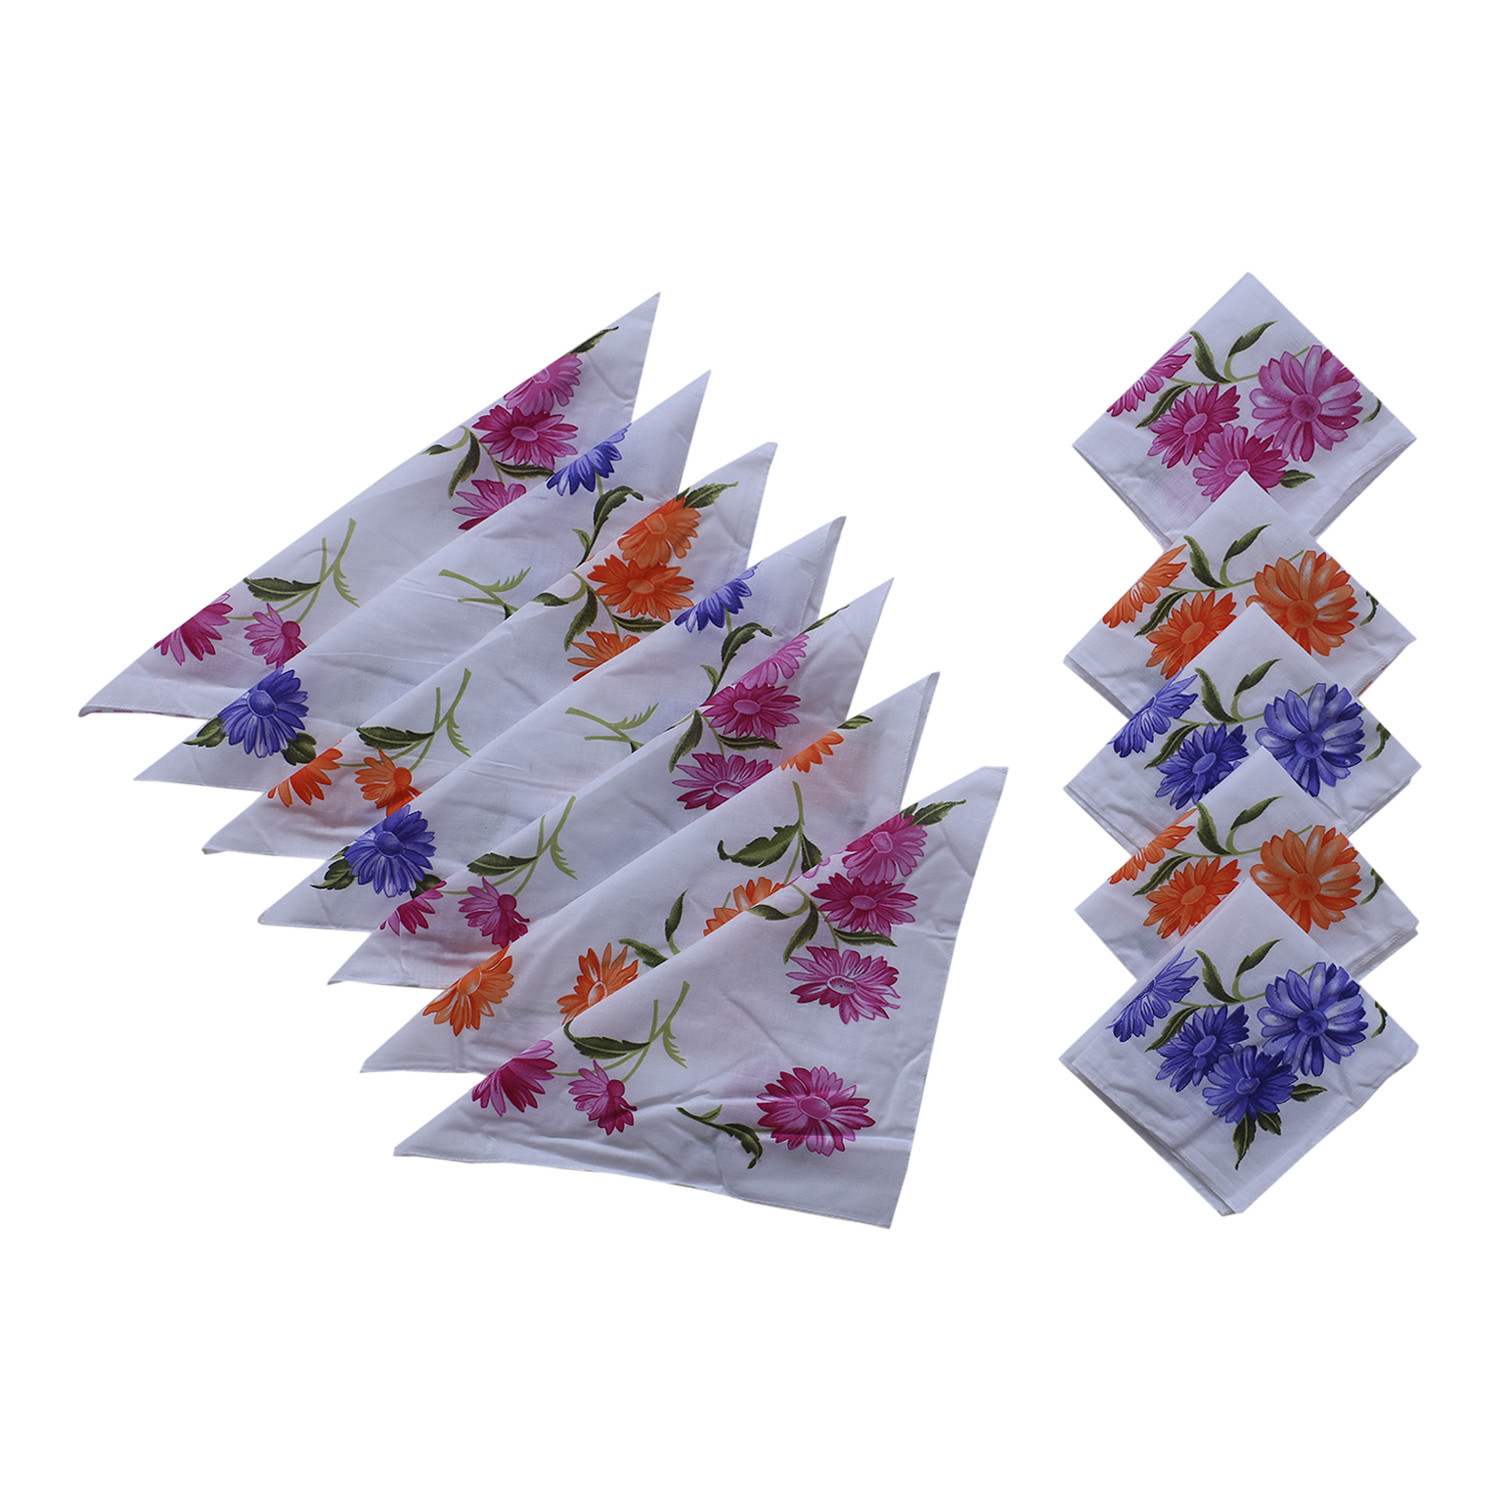 Kuber Industries Handkerchiefs|Soft Cotton Multicolored Sun Flower Print Hankies For Woman,Girls & Wicking Sweat from Hands,Face,Set of 12 (White)